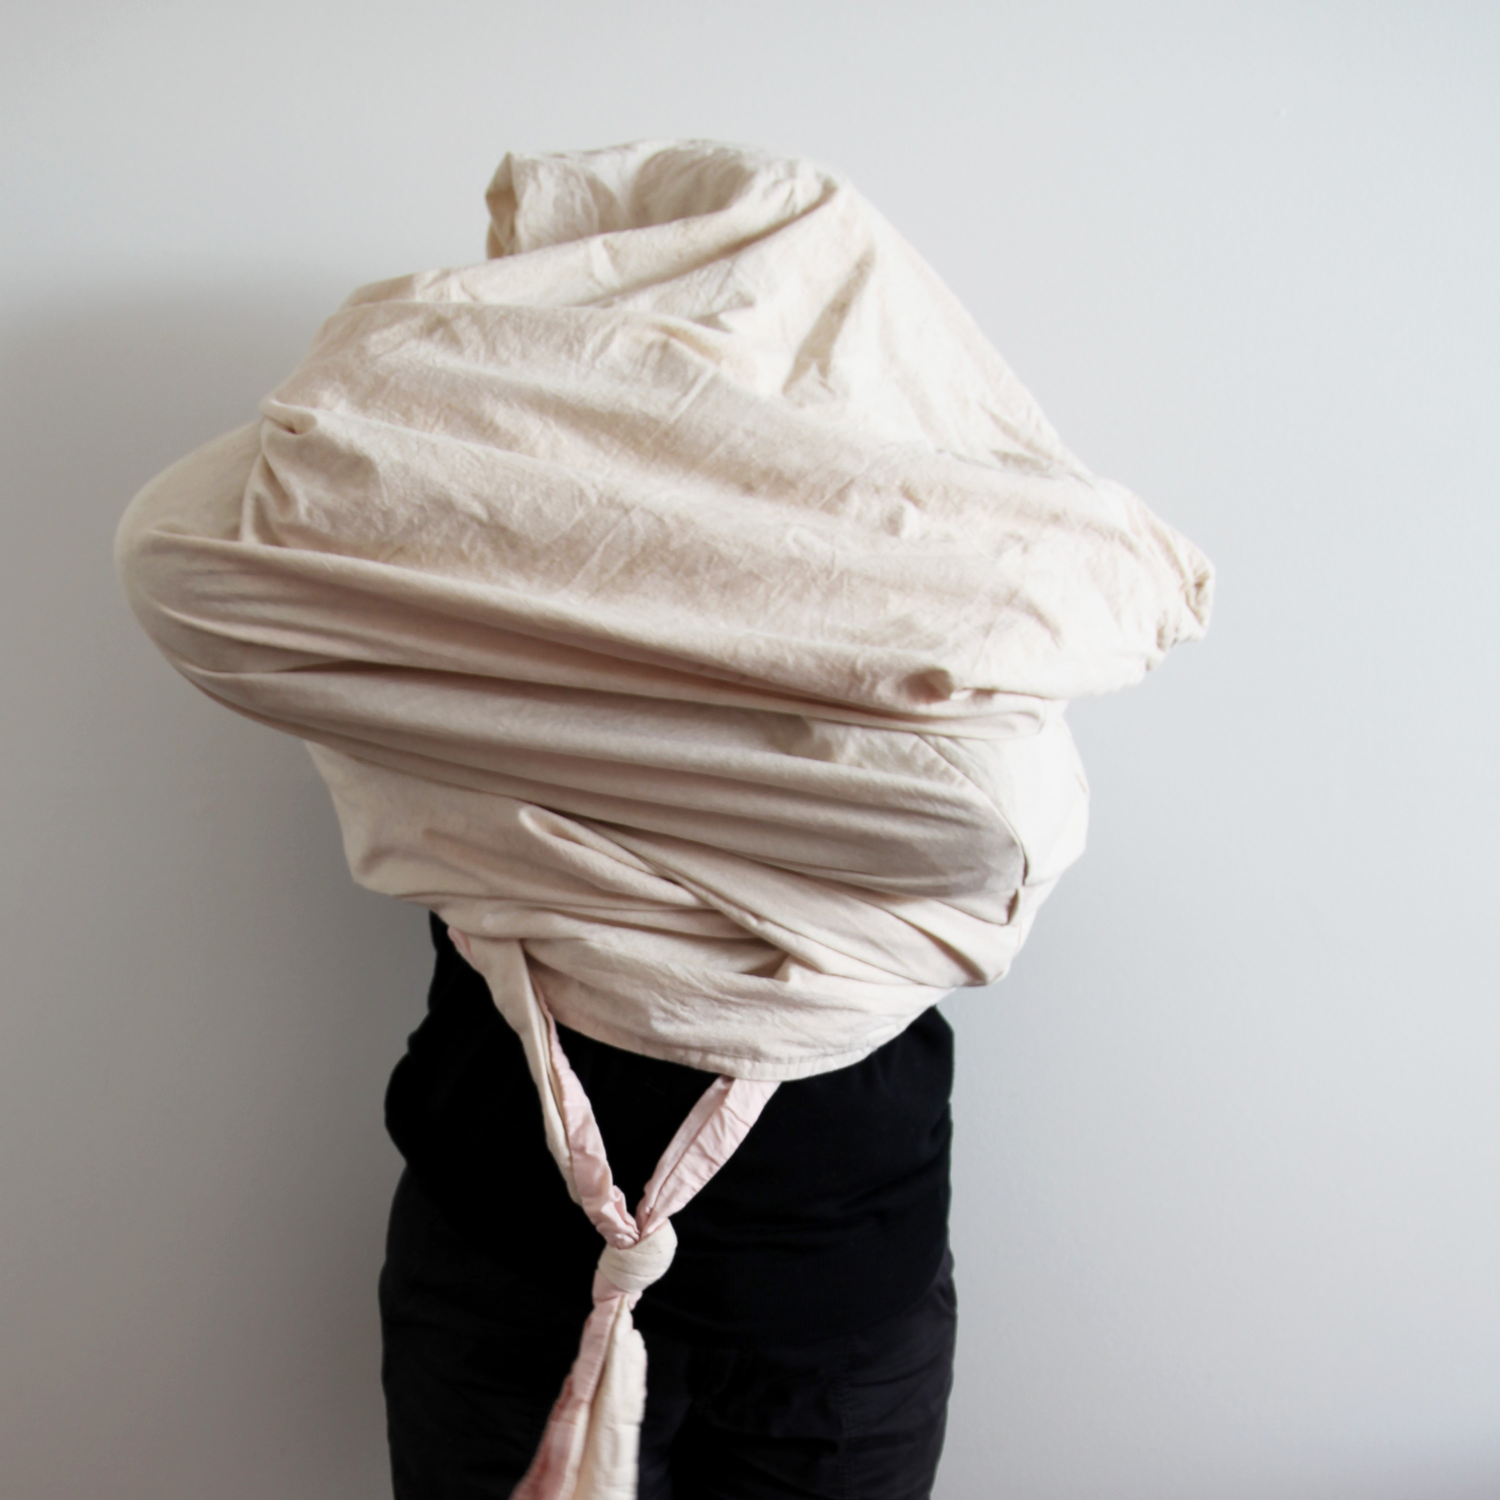 Person with their head and body enclosed in cloth bag.